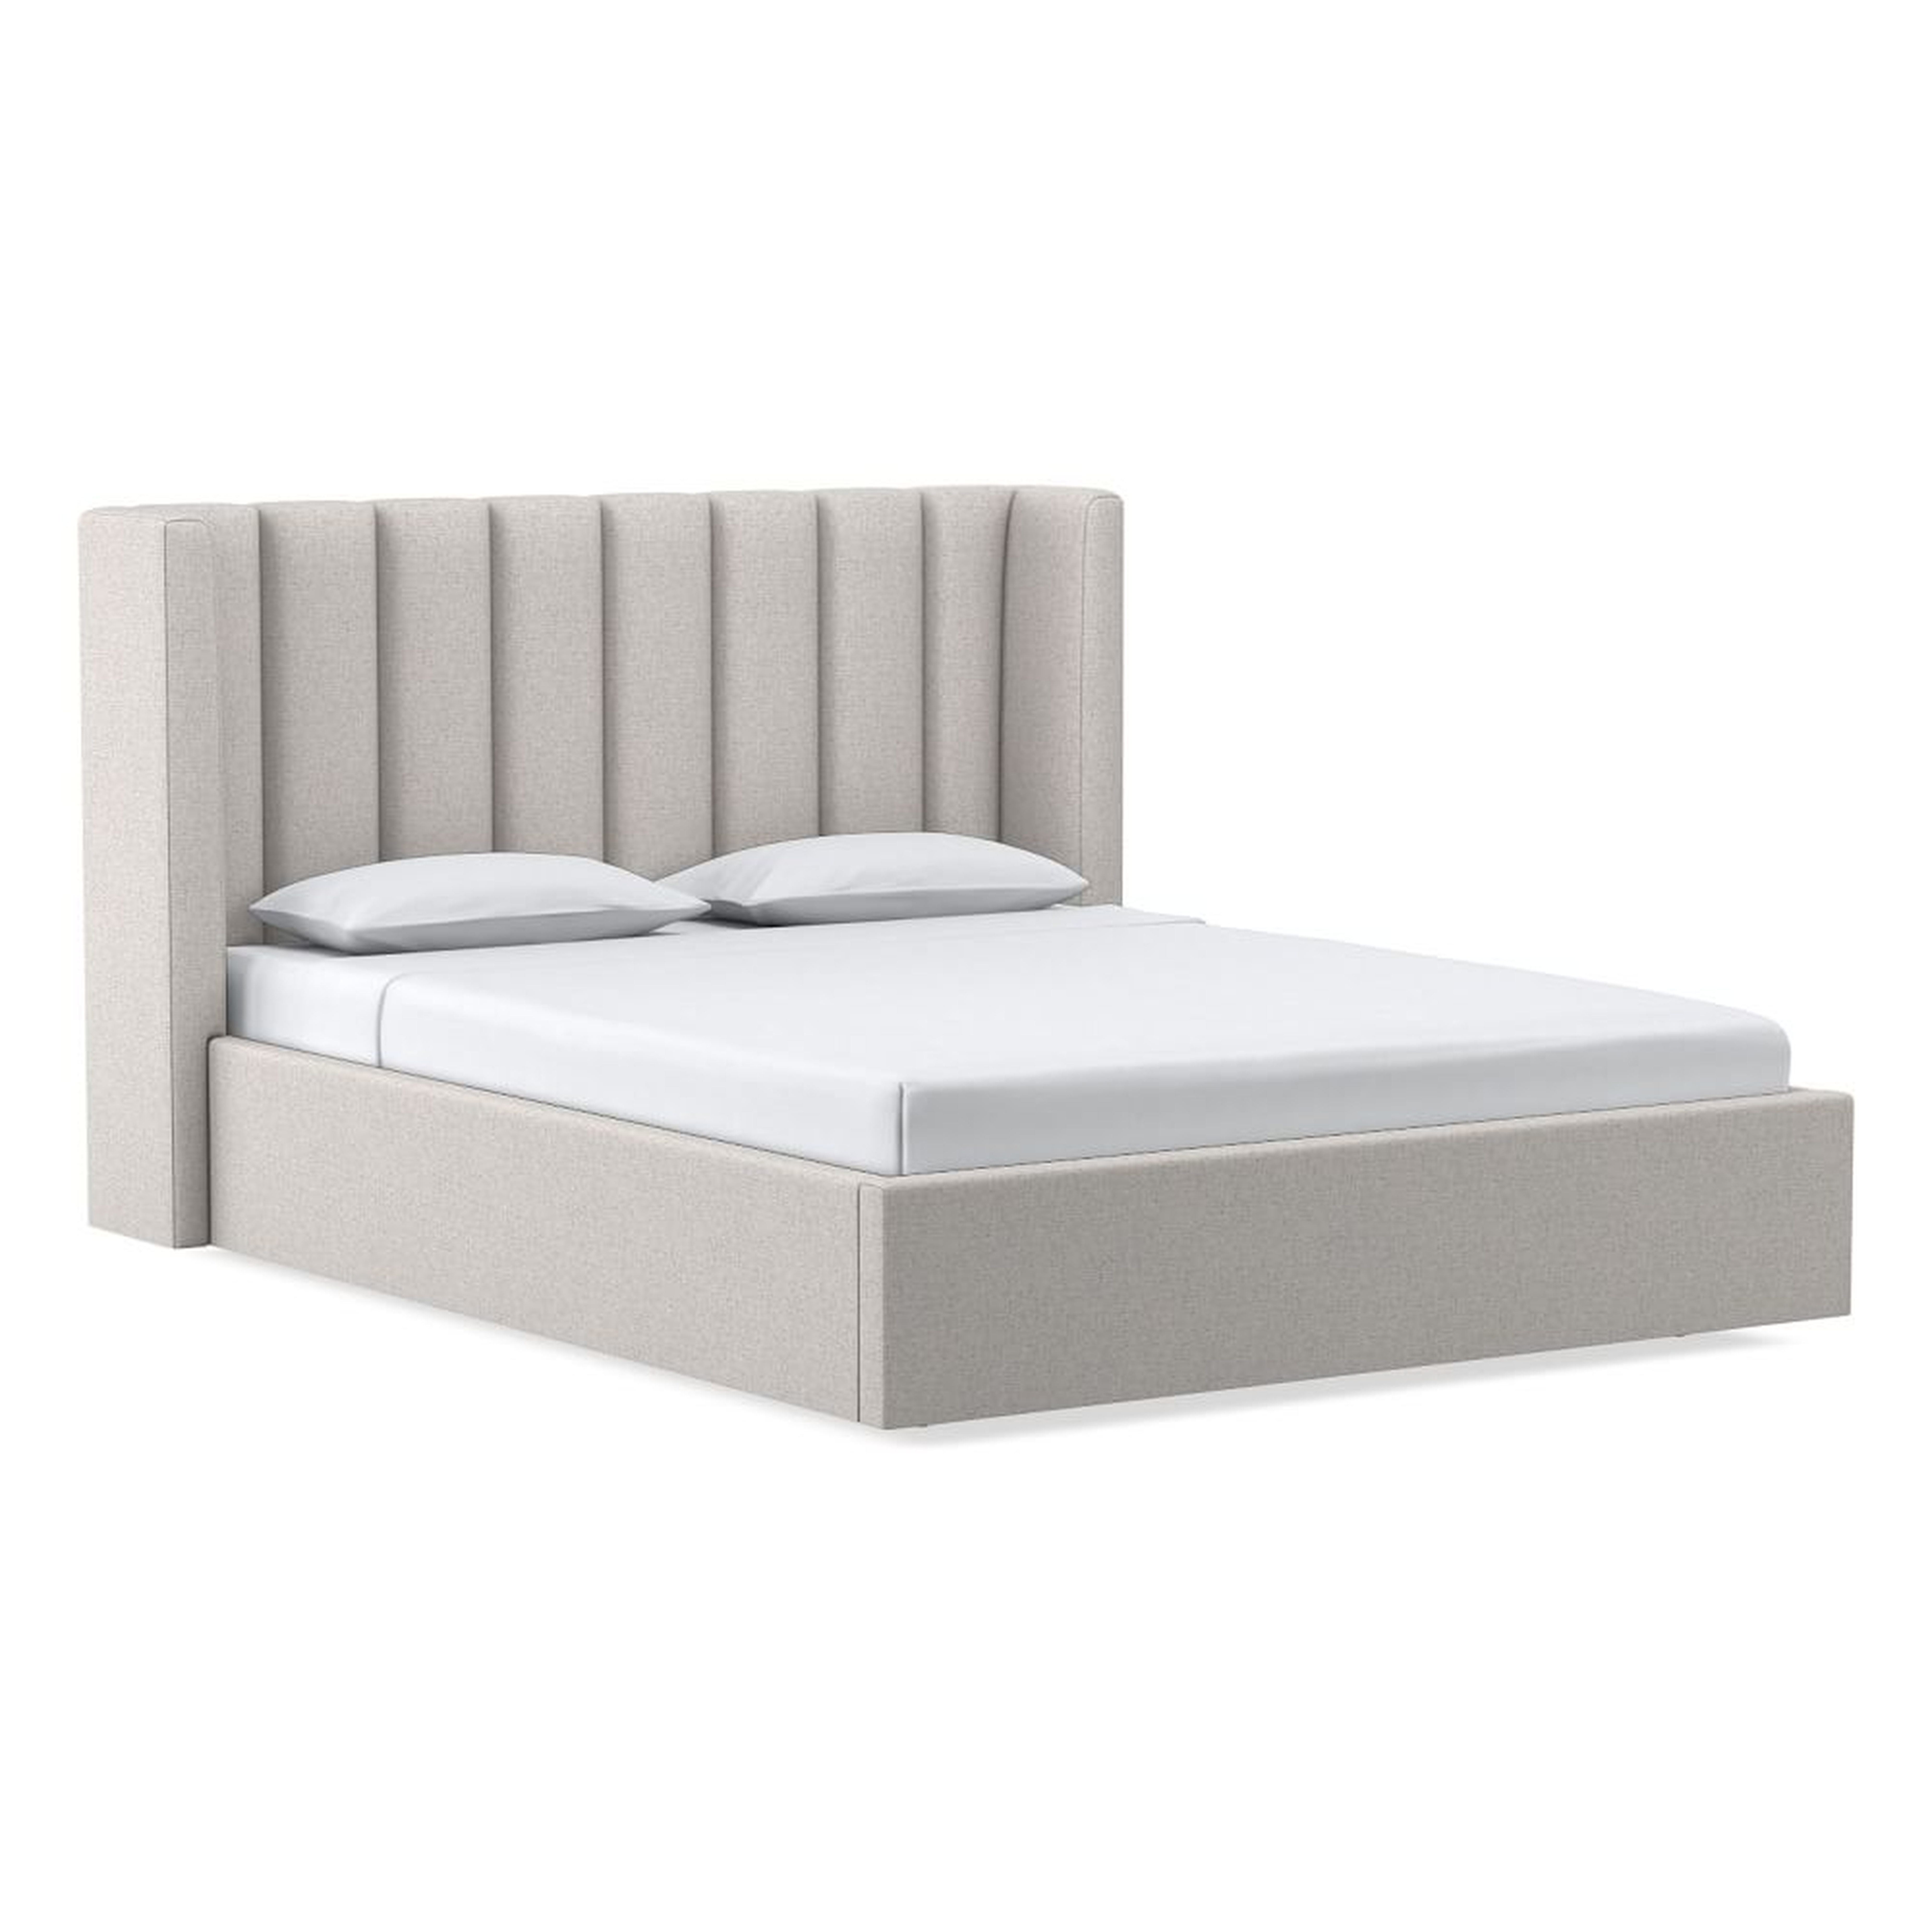 Shelter Vertical Tufting, Low Profile Bed, King, PCL, Dove, No-Show Leg - West Elm